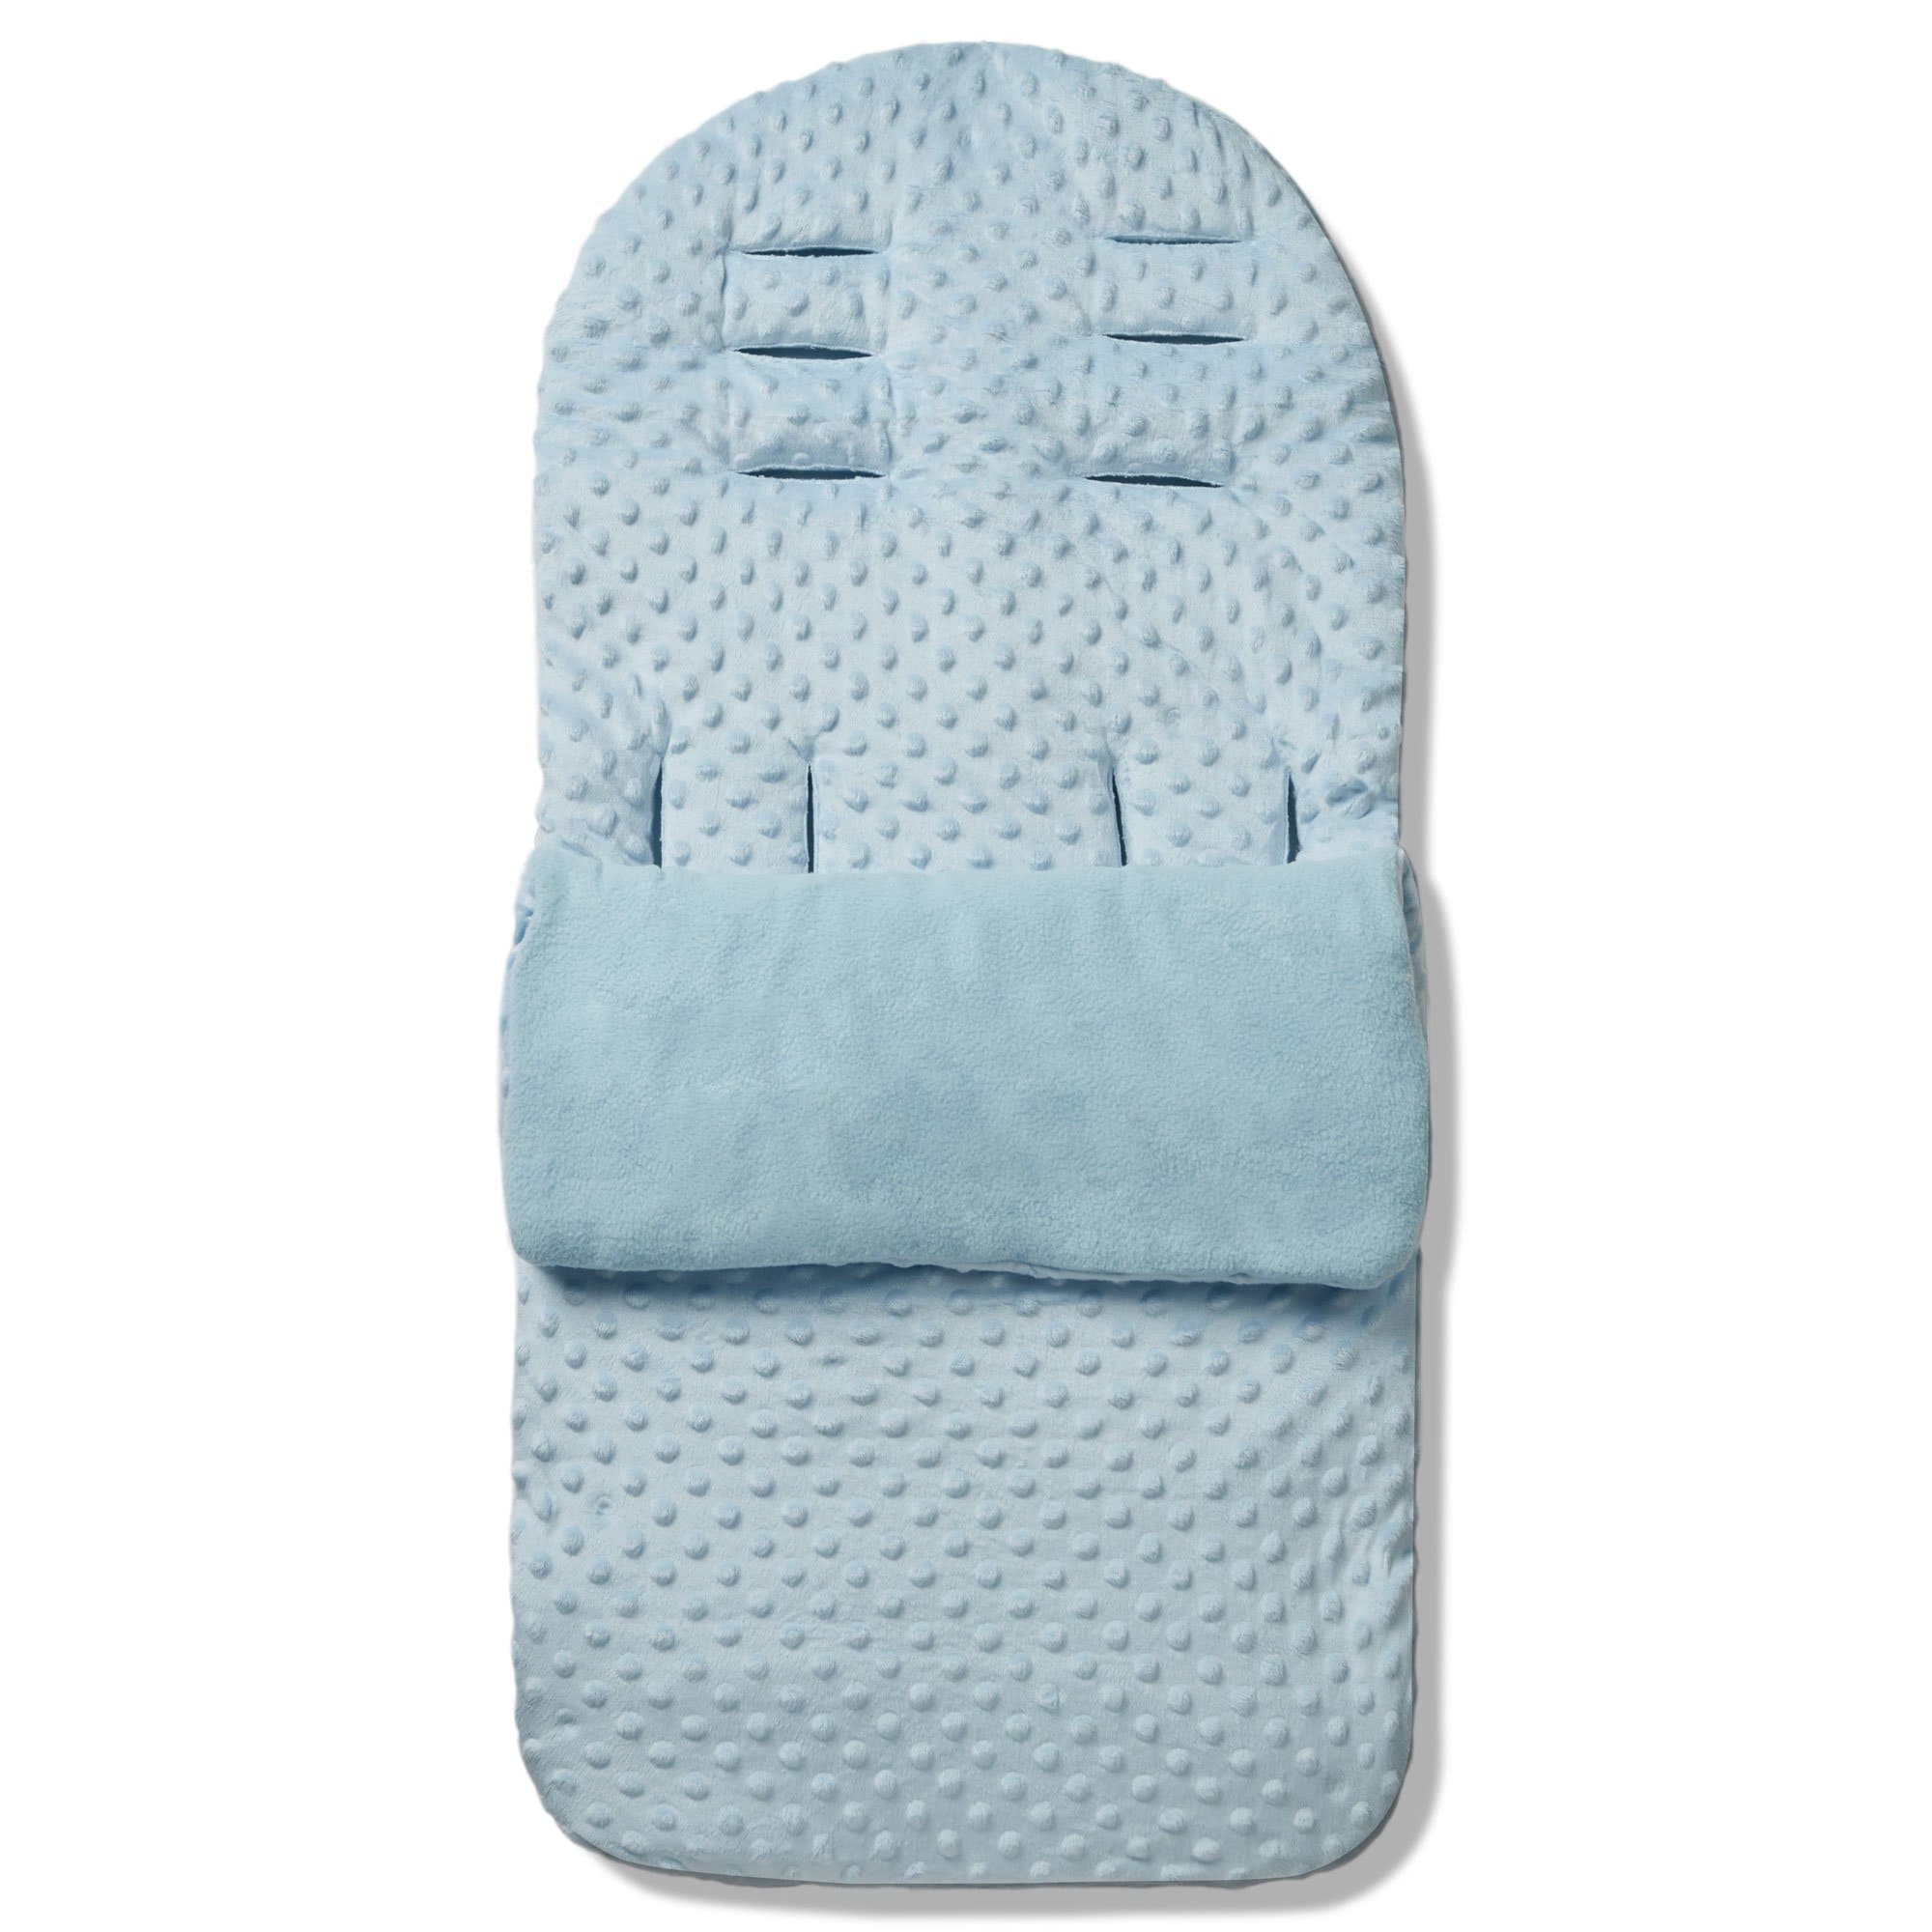 Dimple Footmuff / Cosy Toes Compatible with Kiddicare - For Your Little One